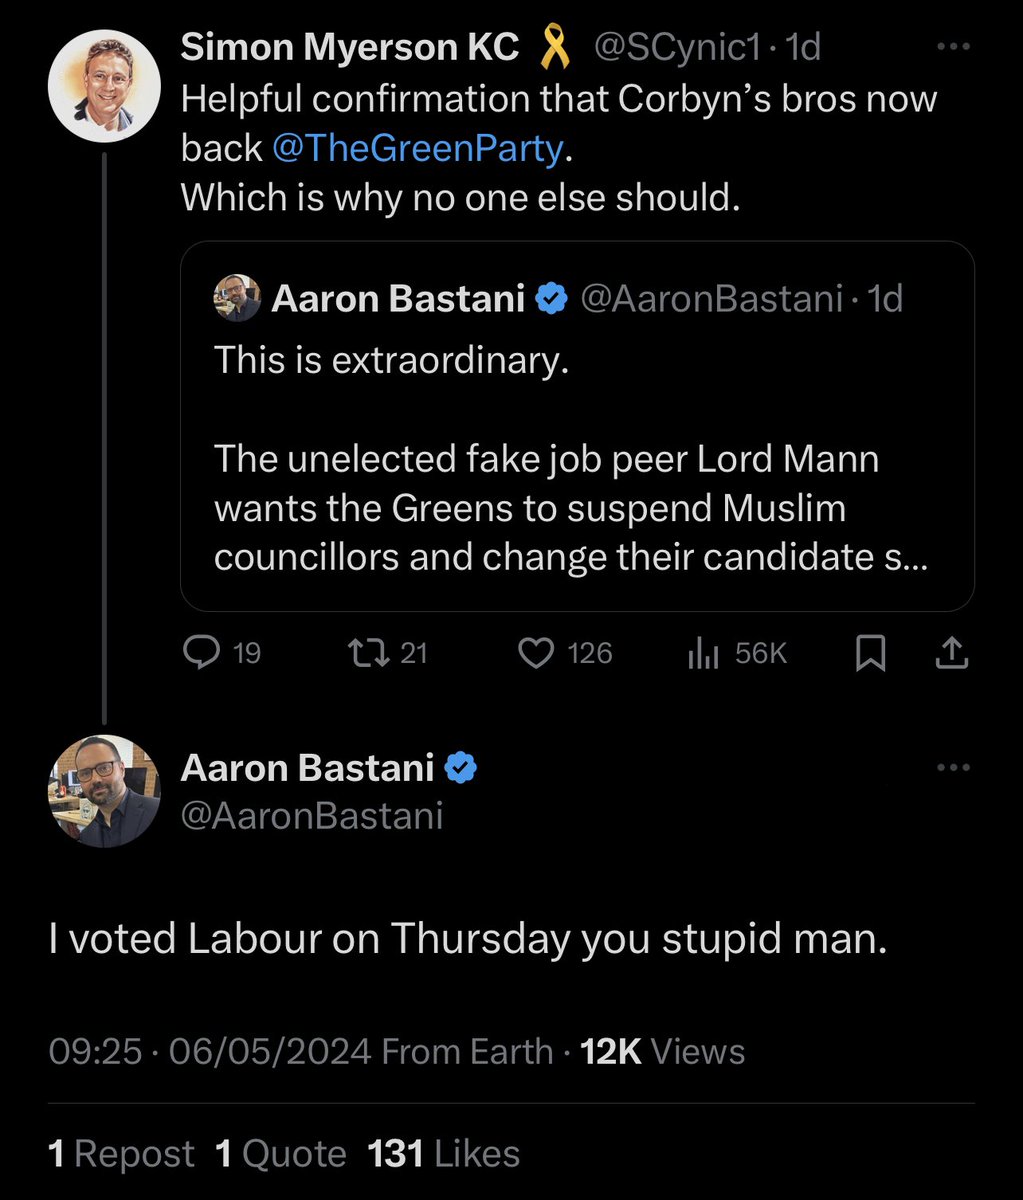 Bastani writes a article for Novara Media the day before polling day after he interviewed George Galloway

Saying he would’ve voted for him but “Prejudice around gender or sexuality is a red line for me.”

So he voted Genocidal Labour instead? of Greens?

The fox’s mask slips.